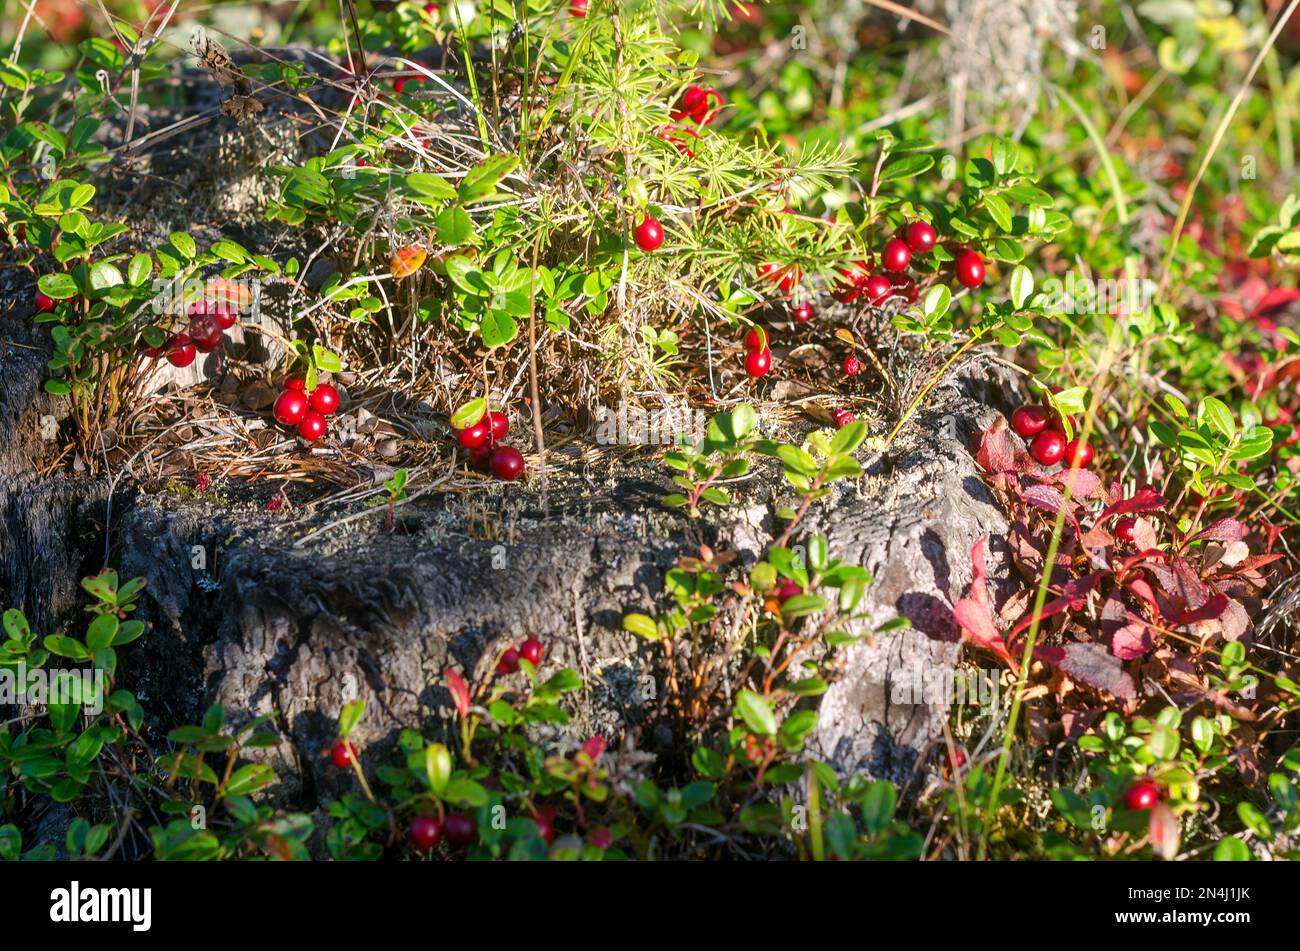 The bright sun illuminates the many juicy red cranberry berries growing thickly on the old stump in the Northern tundra of Russia in autumn. Stock Photo